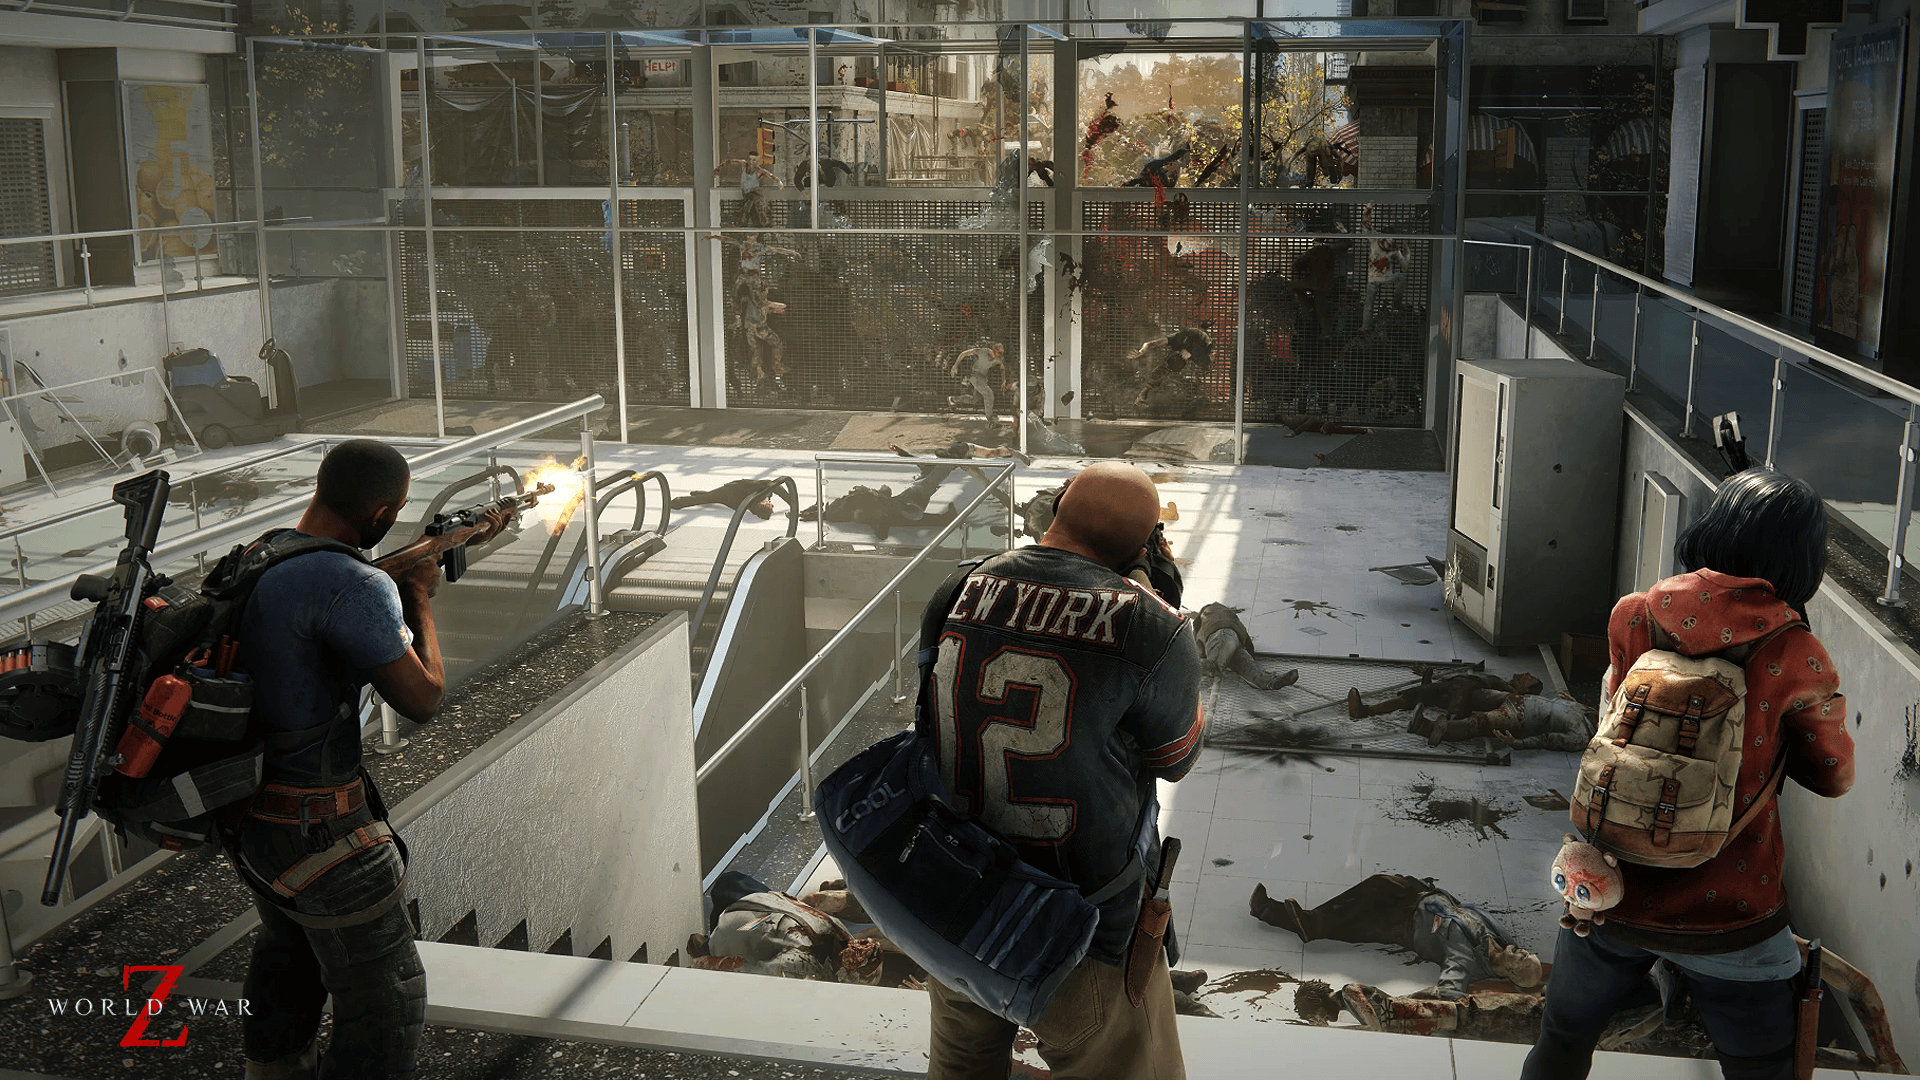 World War Z Update 1.15 Adds Crossplay Feature, Full Patch Notes Inside